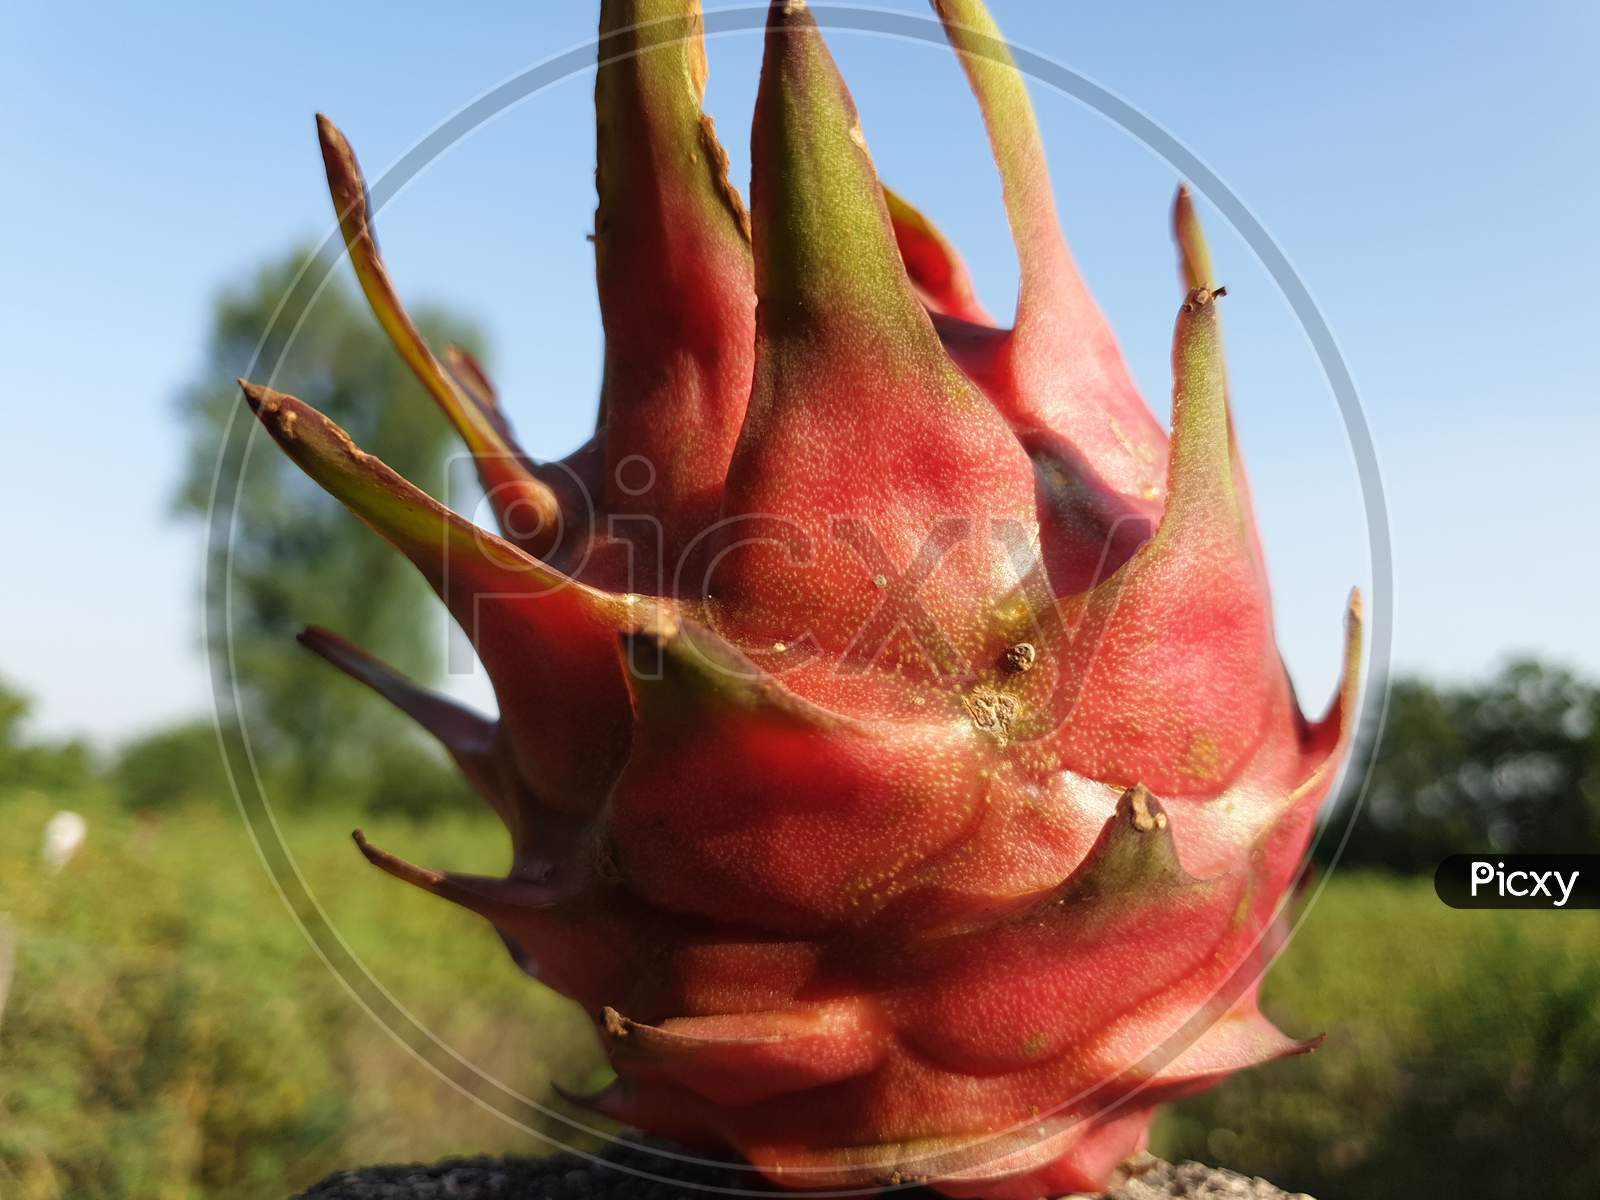 This is the dragon fruit